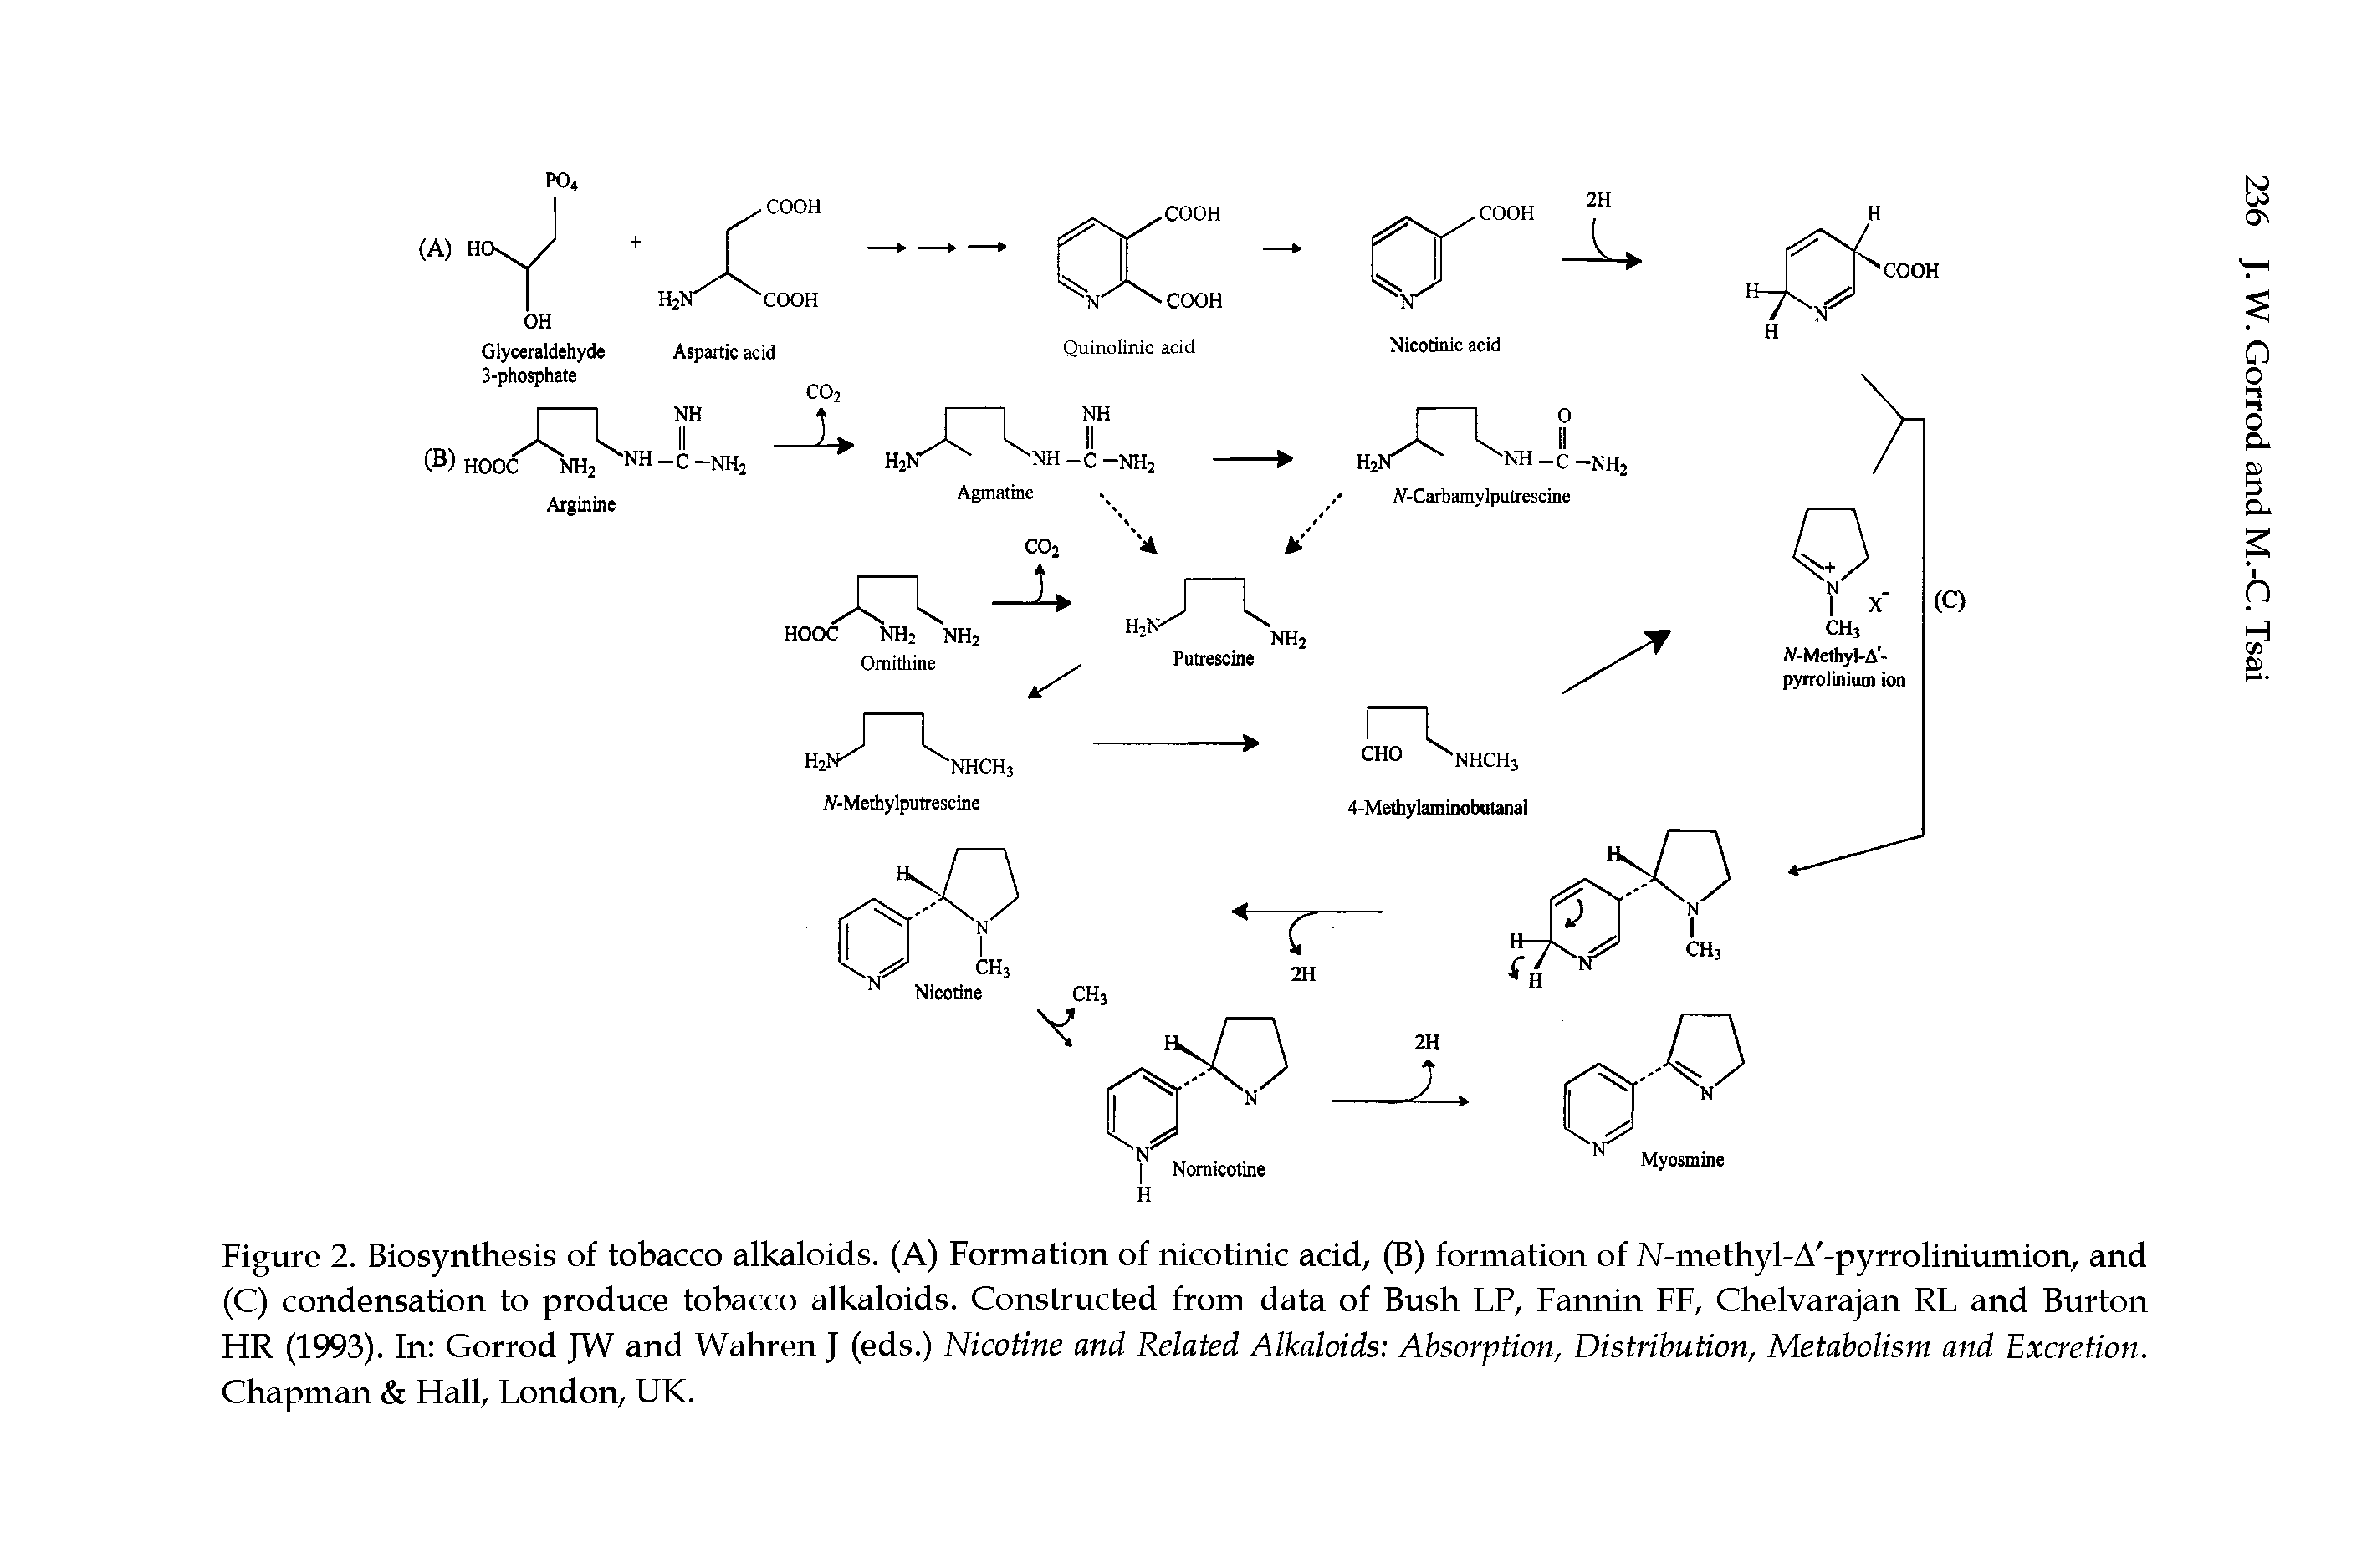 Figure 2. Biosynthesis of tobacco alkaloids. (A) Formation of nicotinic acid, (B) formation of N-methyl-A -pyrroliniumion, and (C) condensation to produce tobacco alkaloids. Constructed from data of Bush LP, Fannin FF, Chelvarajan RL and Burton HR (1993). In Gorrod JW and Wahren J (eds.) Nicotine and Related Alkaloids Absorption, Distribution, Metabolism and Excretion. Chapman Hall, London, UK.